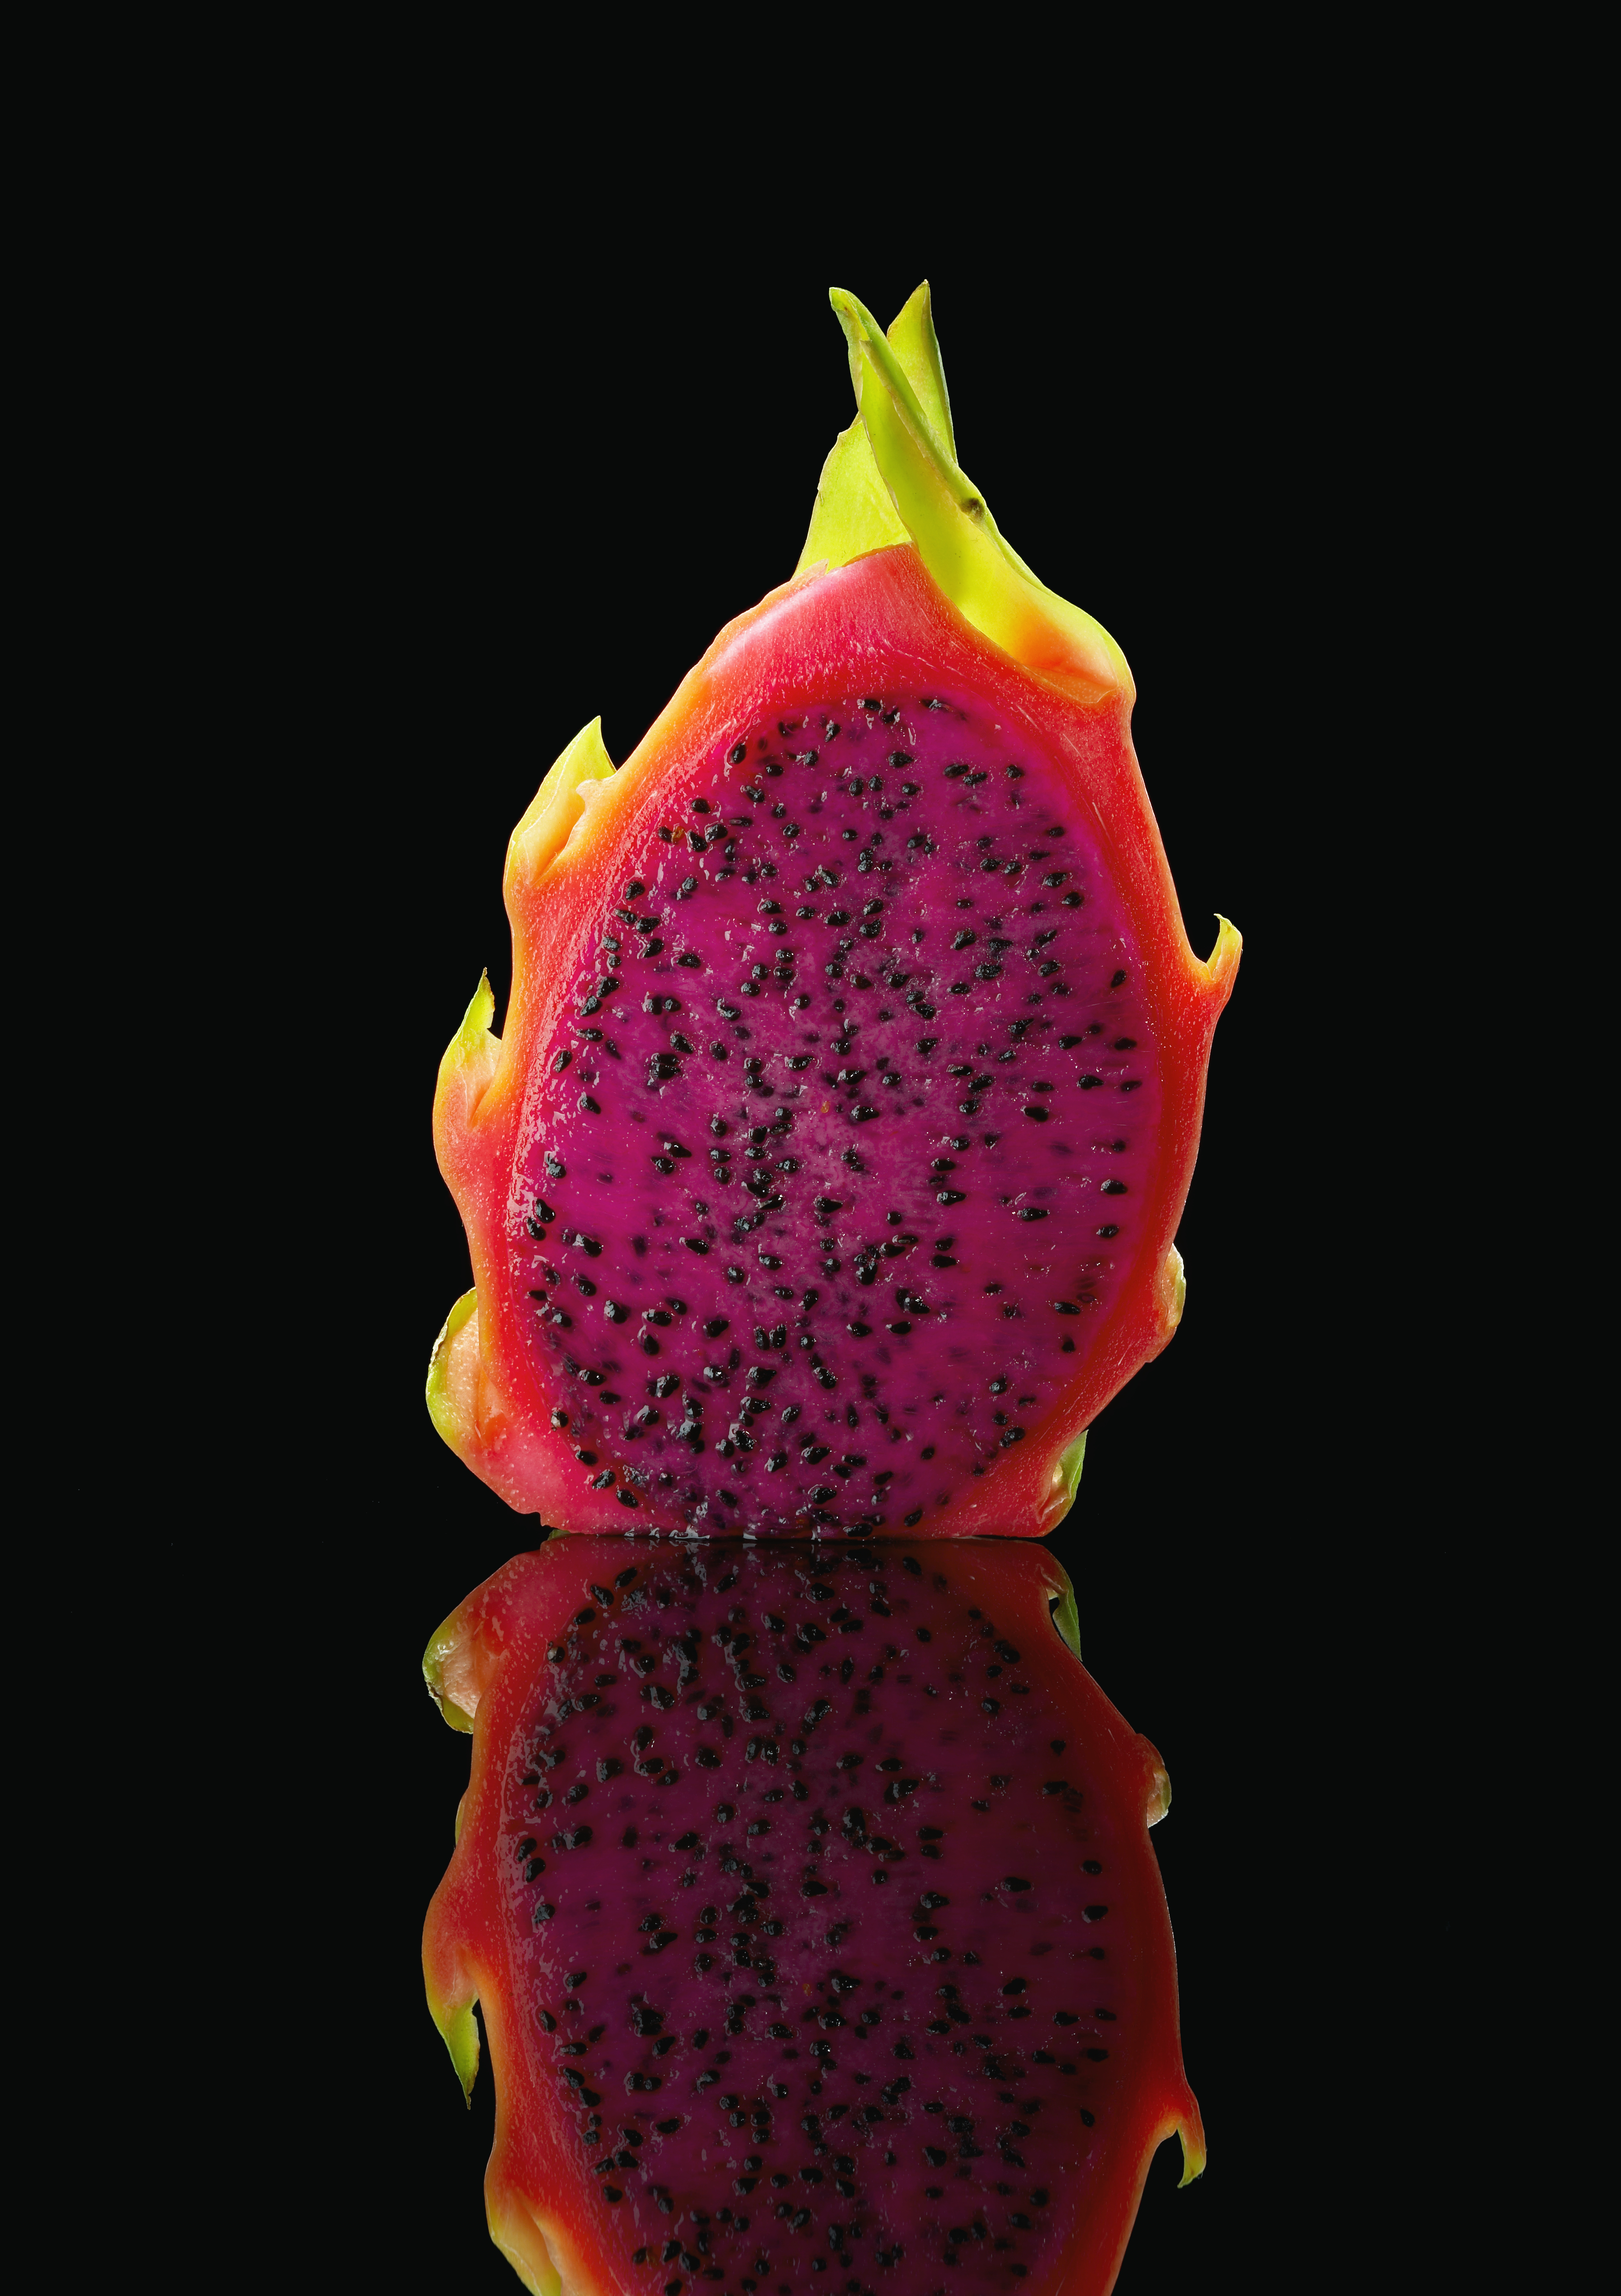 A dragon fruit with red pulp and black seeds | Source: Getty Images